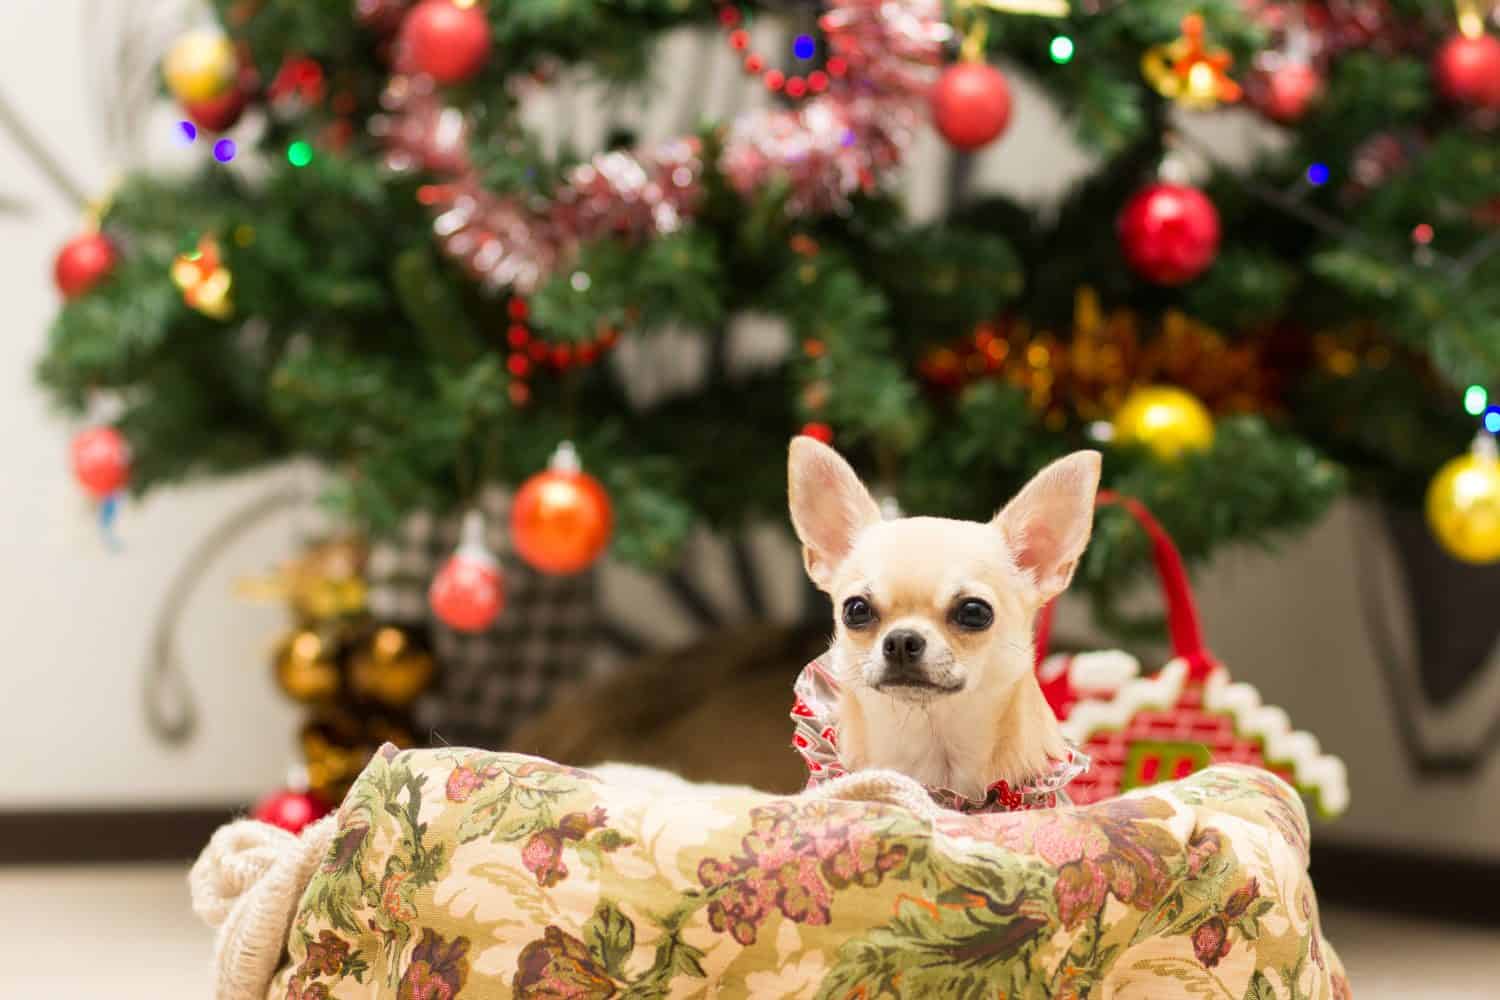 Chihuahua lying in the couch next to Christmas tree waiting for treats.